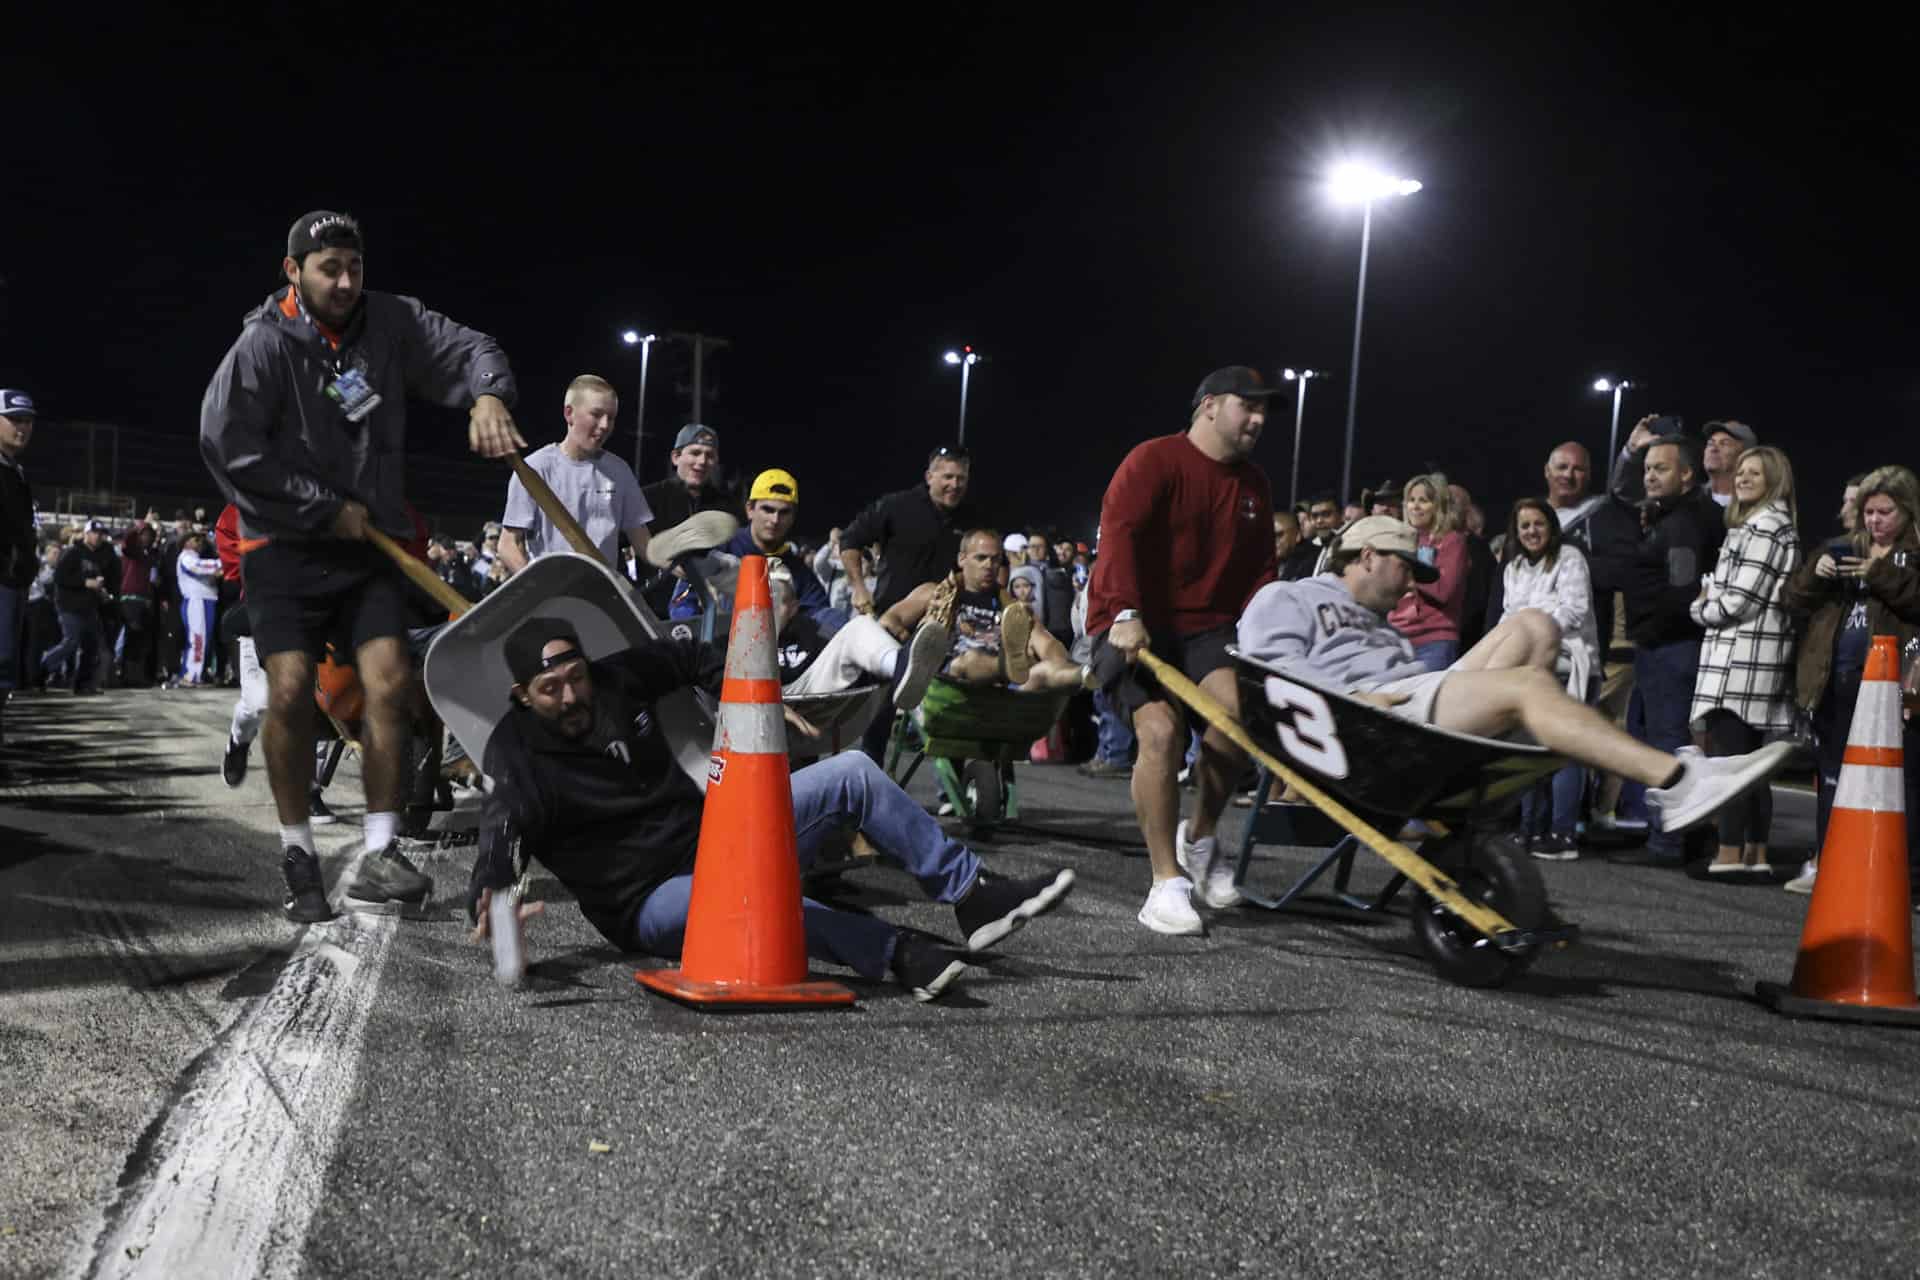 Competitors crash at the loop of the track in the wheelbarrow race of daytona. Photo by rachel schuoler.